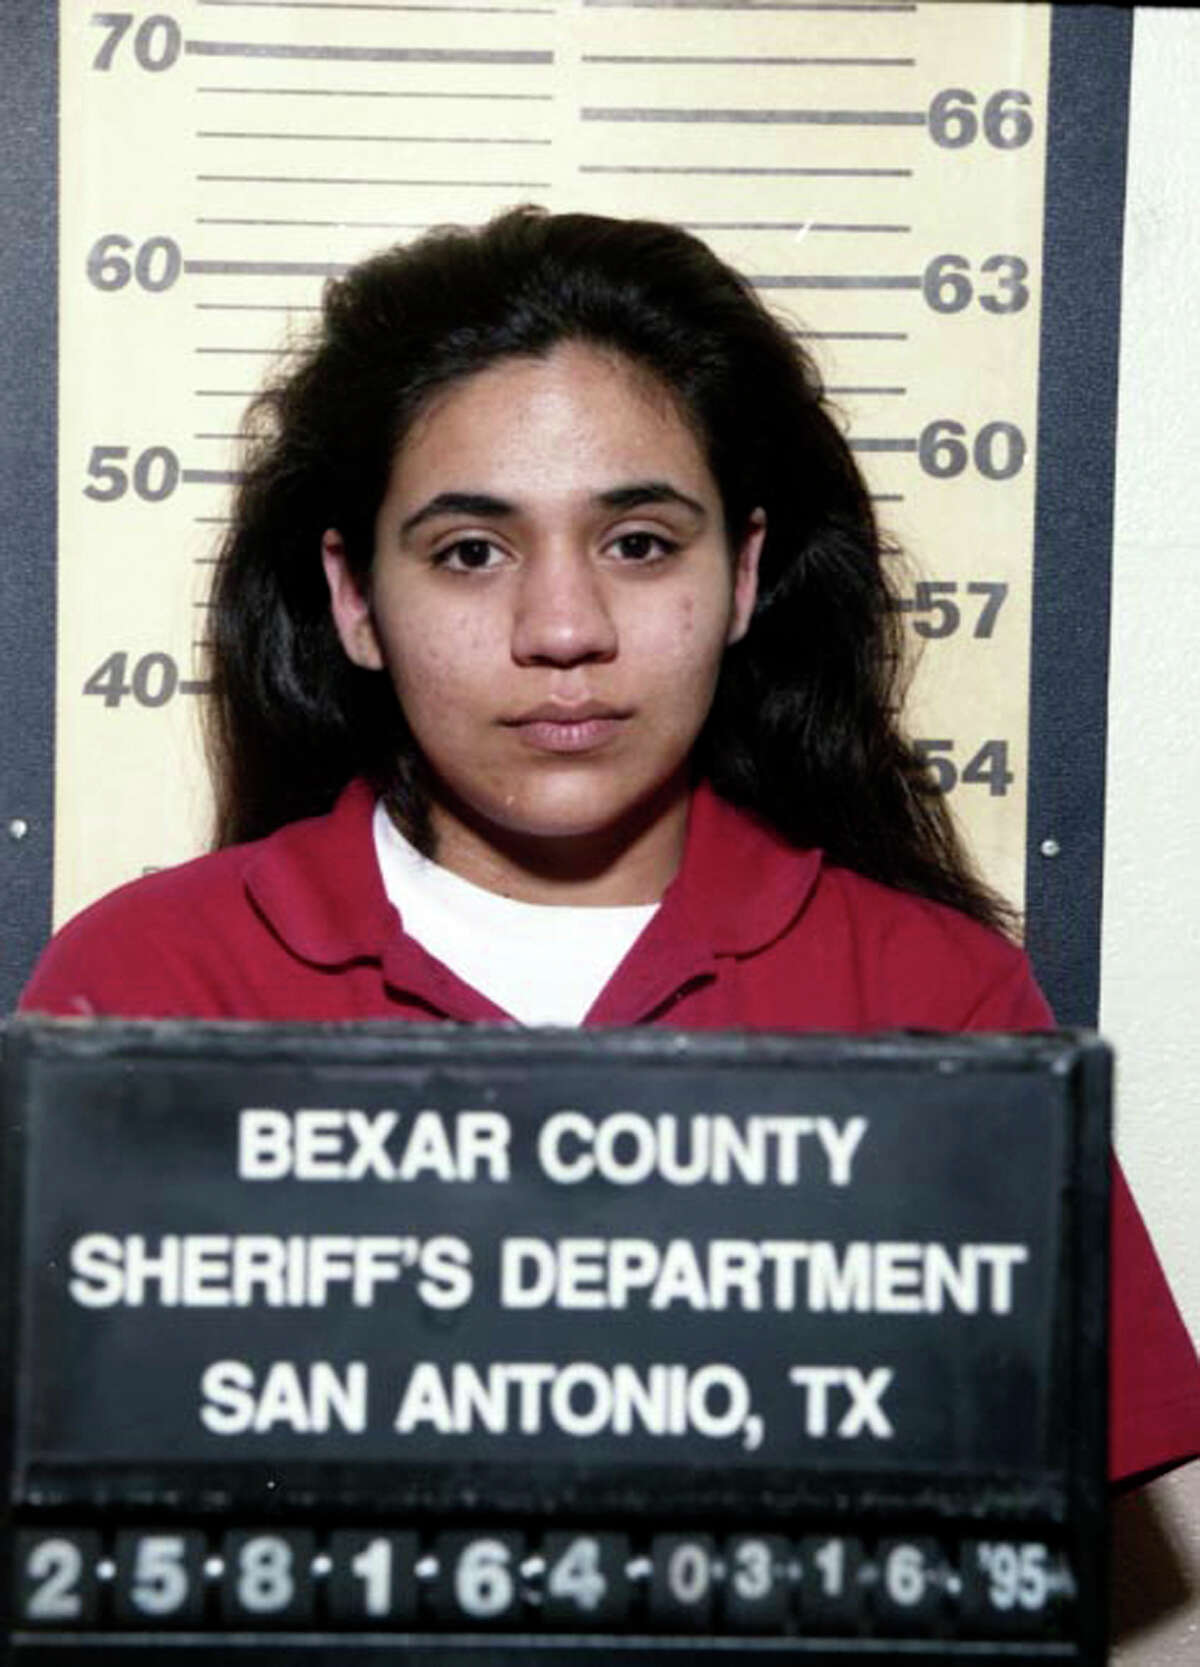 Photo of Cassandra Rivera. .....Elizabeth Ramirez, her roommate Kristie Mayhugh, and their two friends, Anna Vasquez and Cassandra Rivera, were accused in Sept. 1994 of sexually assaulting Elizabeth's two nieces, , when the two girls visited Elizabeth's apartment at the end of July that same year. The four women were arrested after a grand jury indicted them 3/15/95 on two counts each of aggravated sexual assault of a child and two counts of indecency with a child.